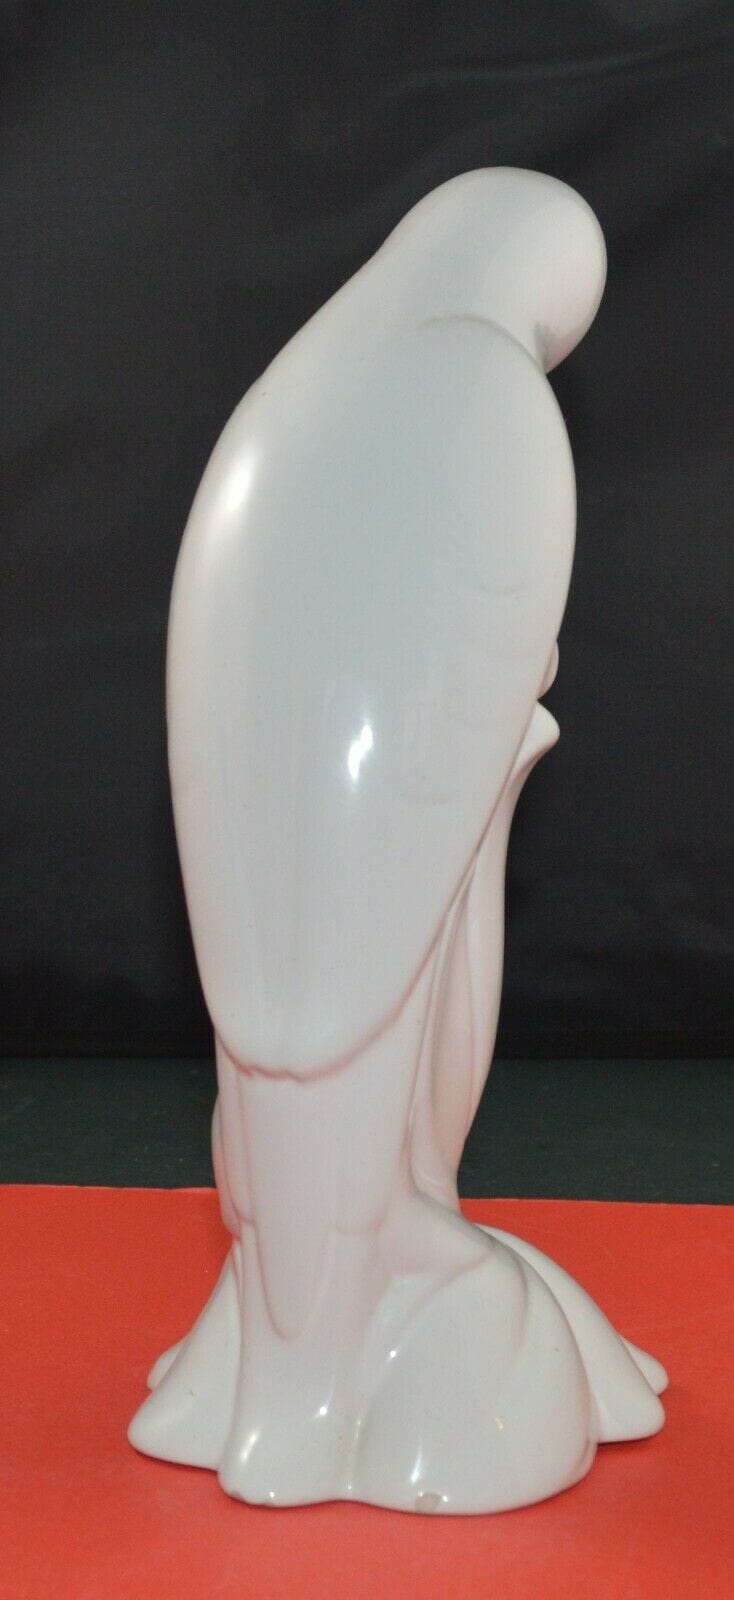 BIRD FIGURINE ELEVEN INCH WHITE PARROT FIGURINE( PREVIOUSLY OWNED)GOOD CONDITION - TMD167207